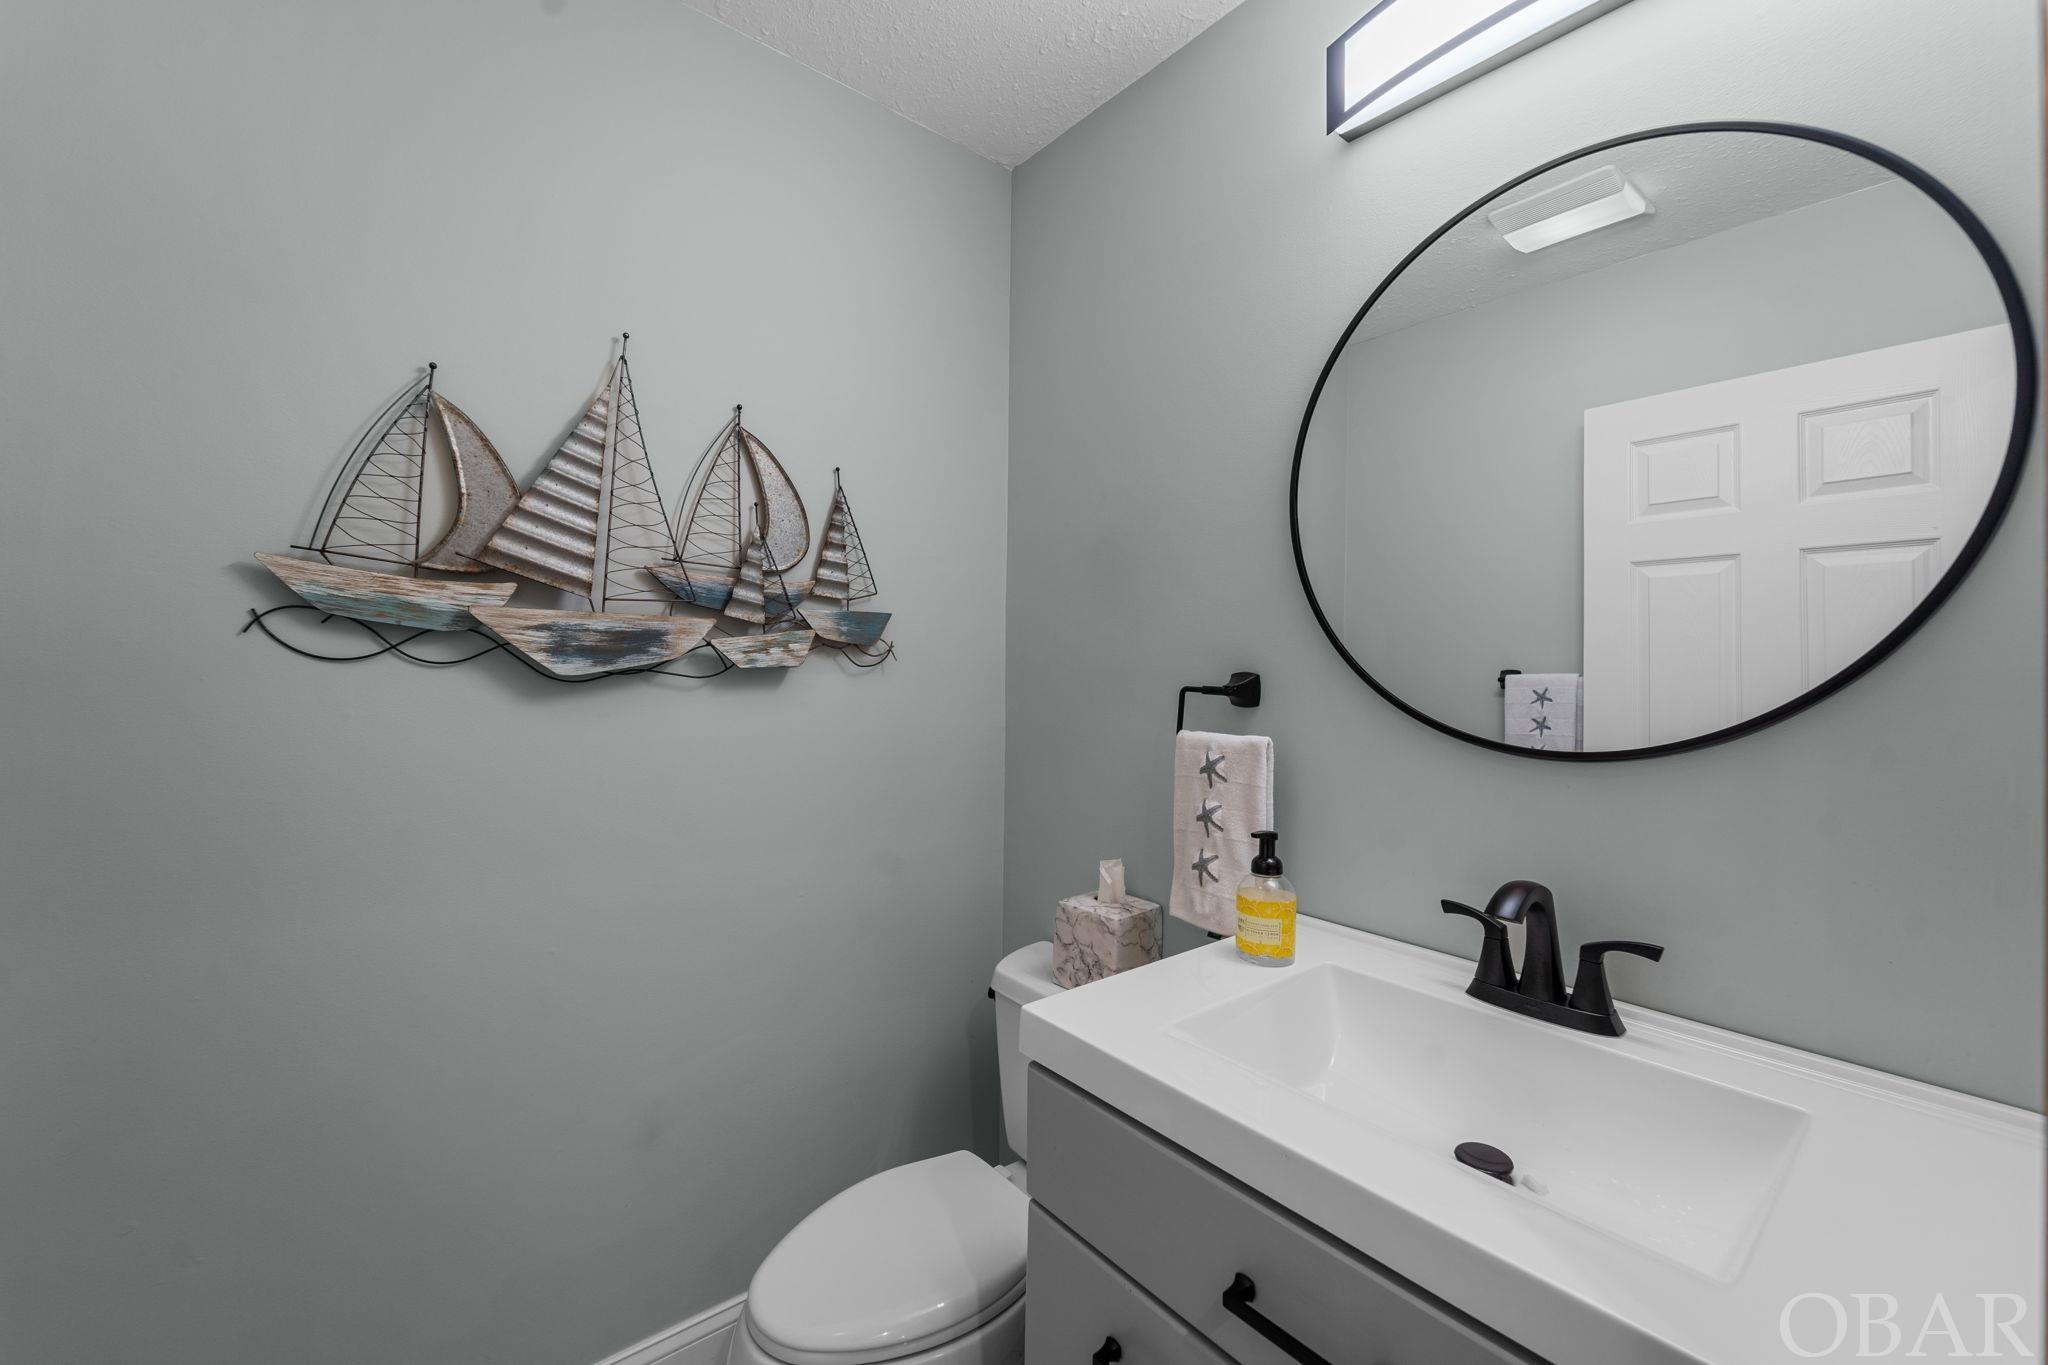 140 Duck Woods Drive, Southern Shores, NC 27949, 3 Bedrooms Bedrooms, ,2 BathroomsBathrooms,Residential,For sale,Duck Woods Drive,125368